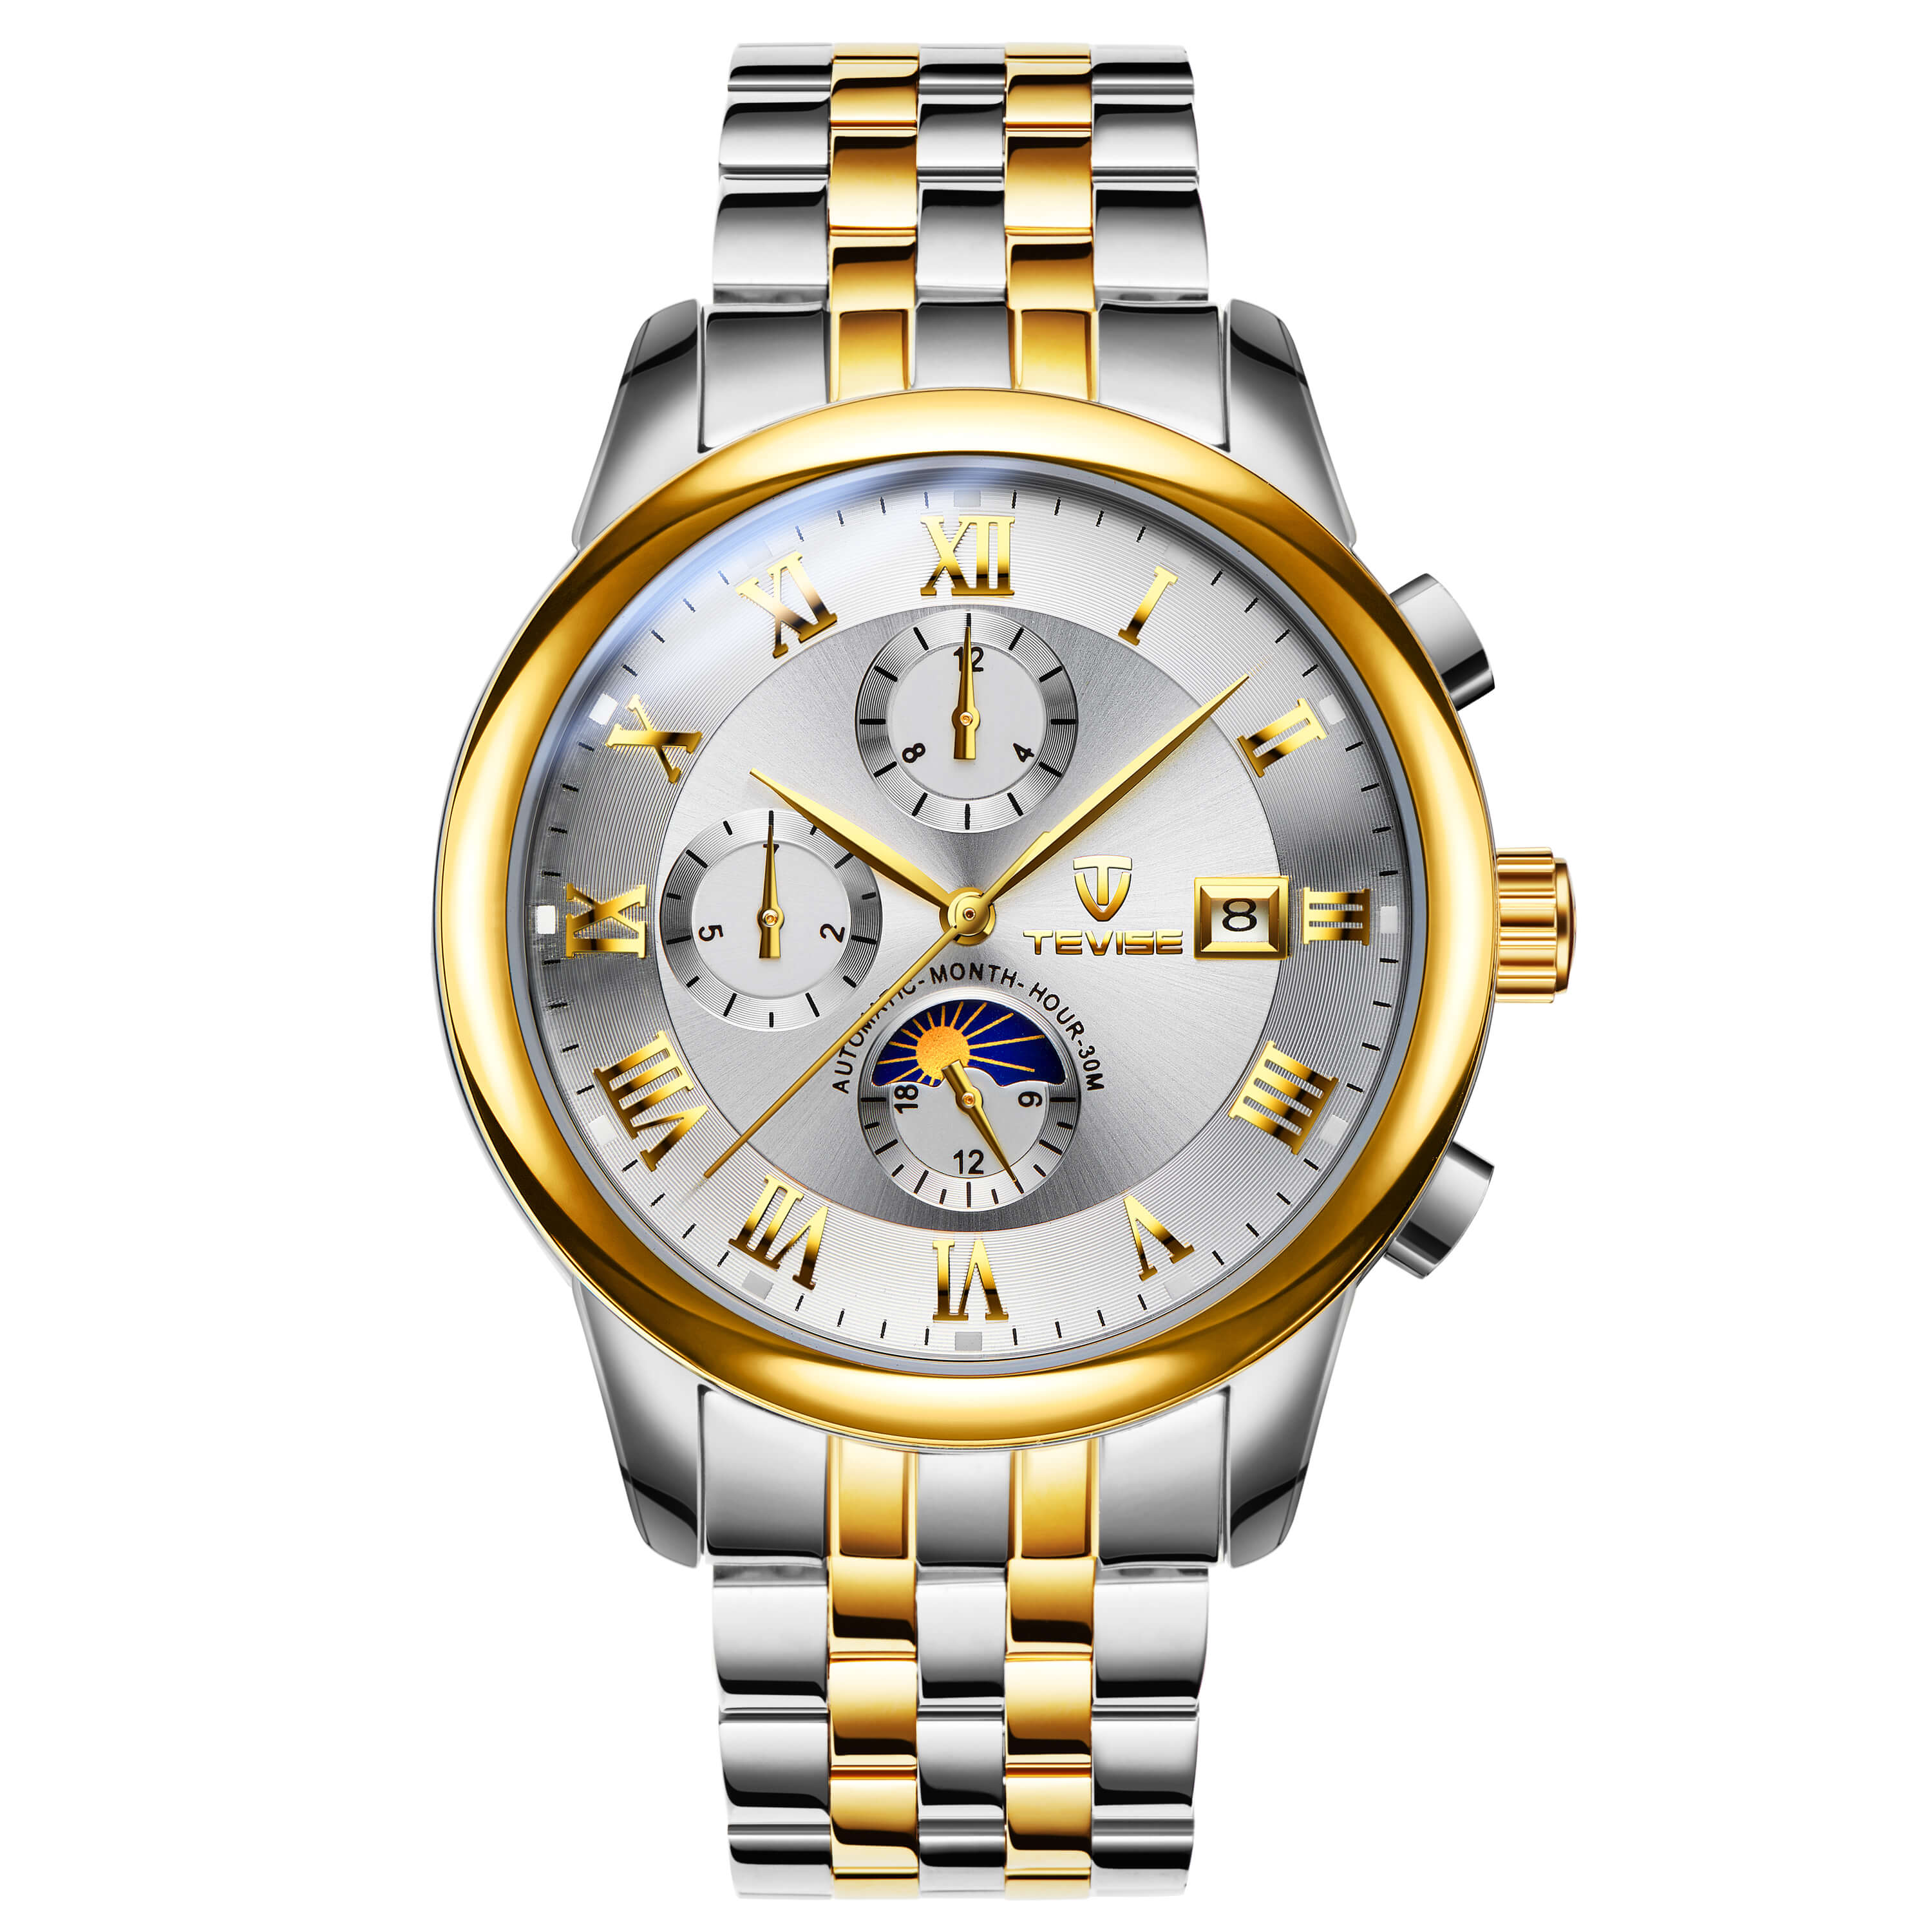 TEVISE 9008 Men's Automatic Mechanical Men's Watch Moon Phase Stainless Steel - Gold